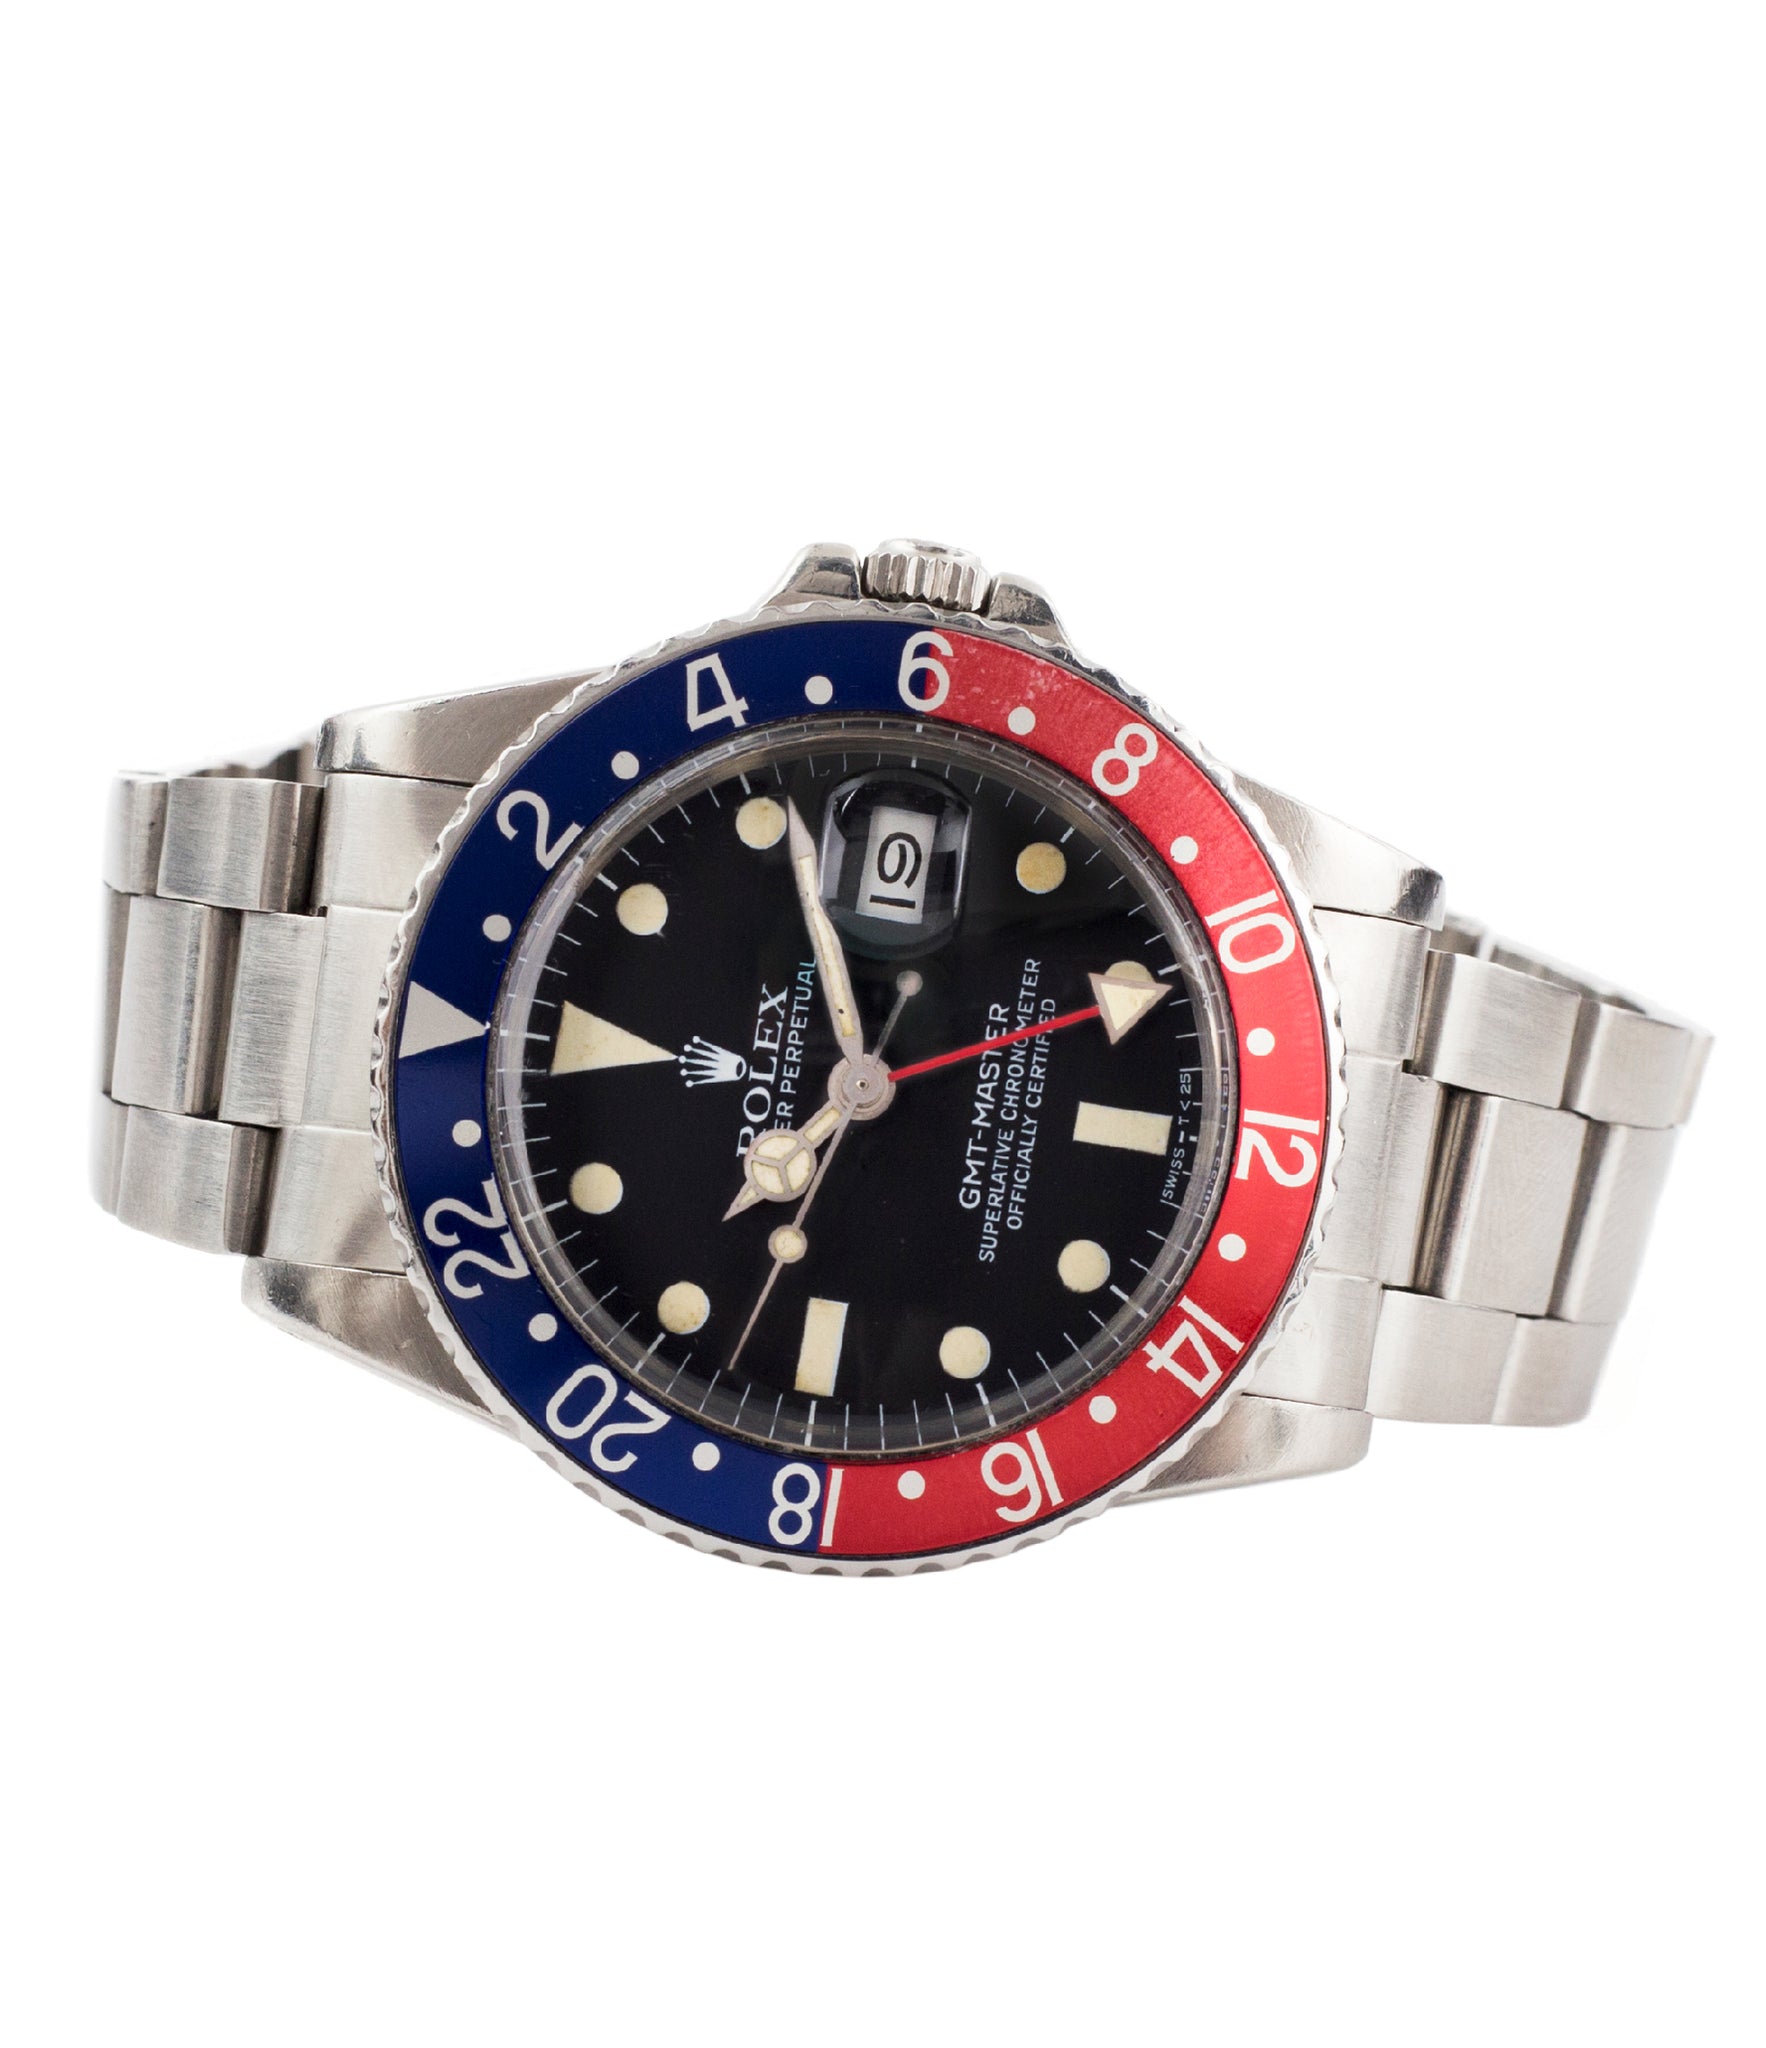 buy Rolex 16750 GMT-Master Pepsi bezel steel sport traveller watch for sale online at A Collected Man London vintage watch specialist